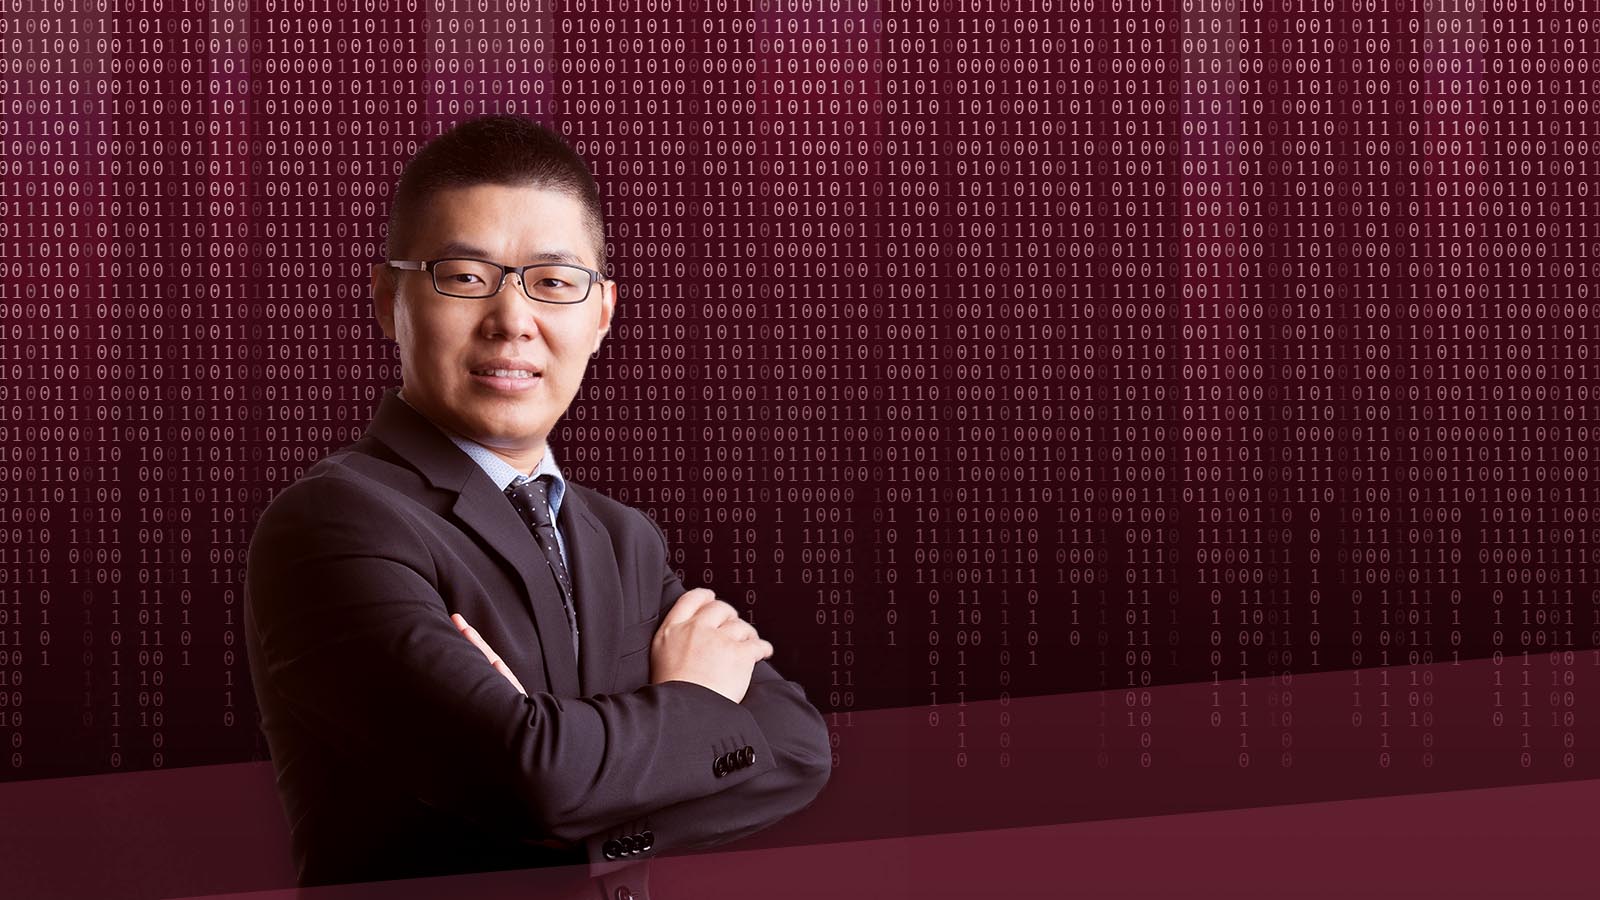 Yanyan Li co-developed an easy-to-use cybersecurity education tool designed to leverage cloud resources for instructors and provide an exceptional user lab experience for students.